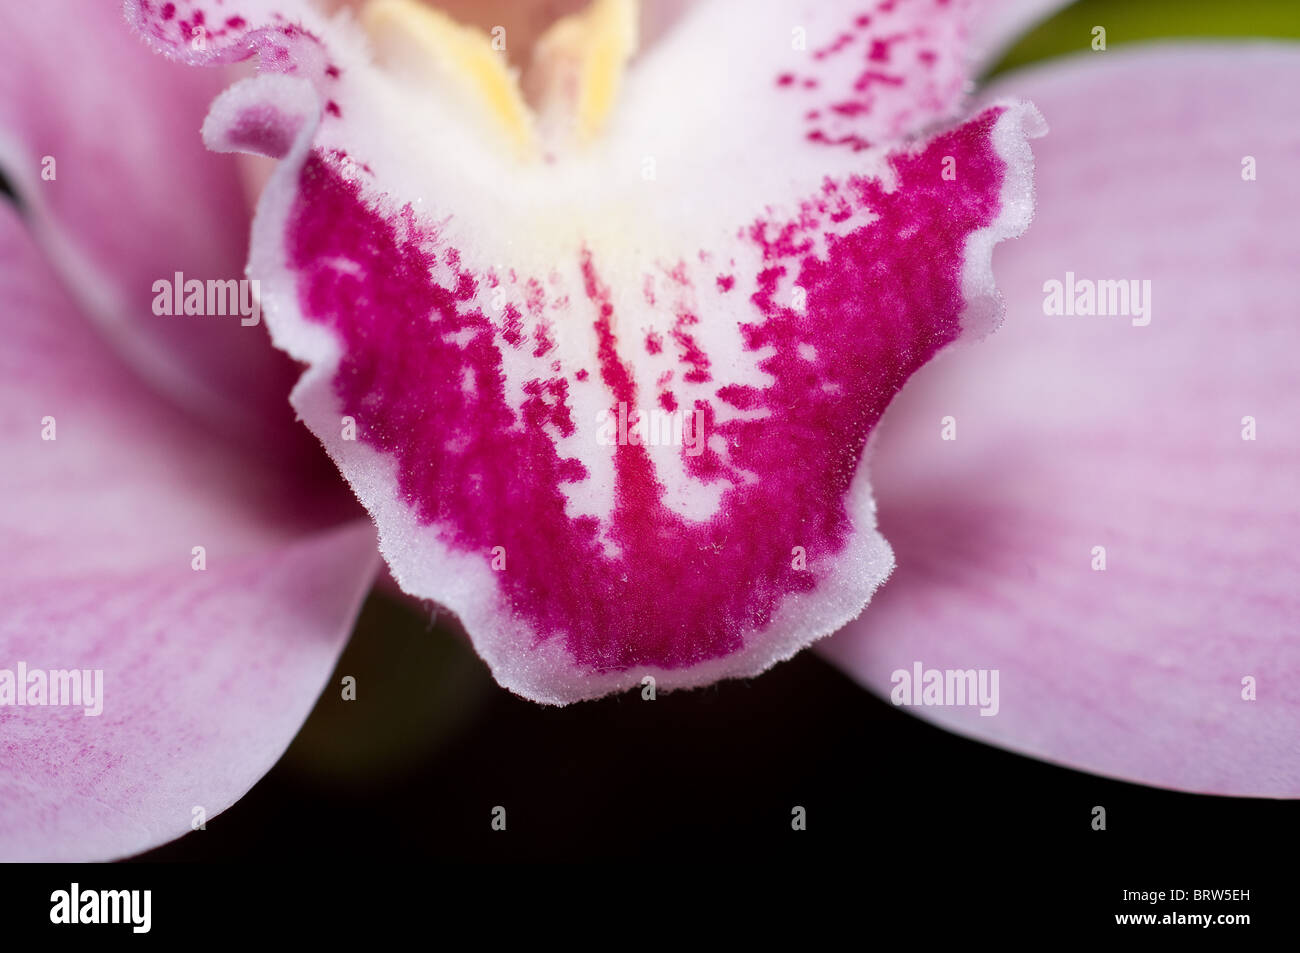 Detail of a Cymbidium sp. Orchid Stock Photo